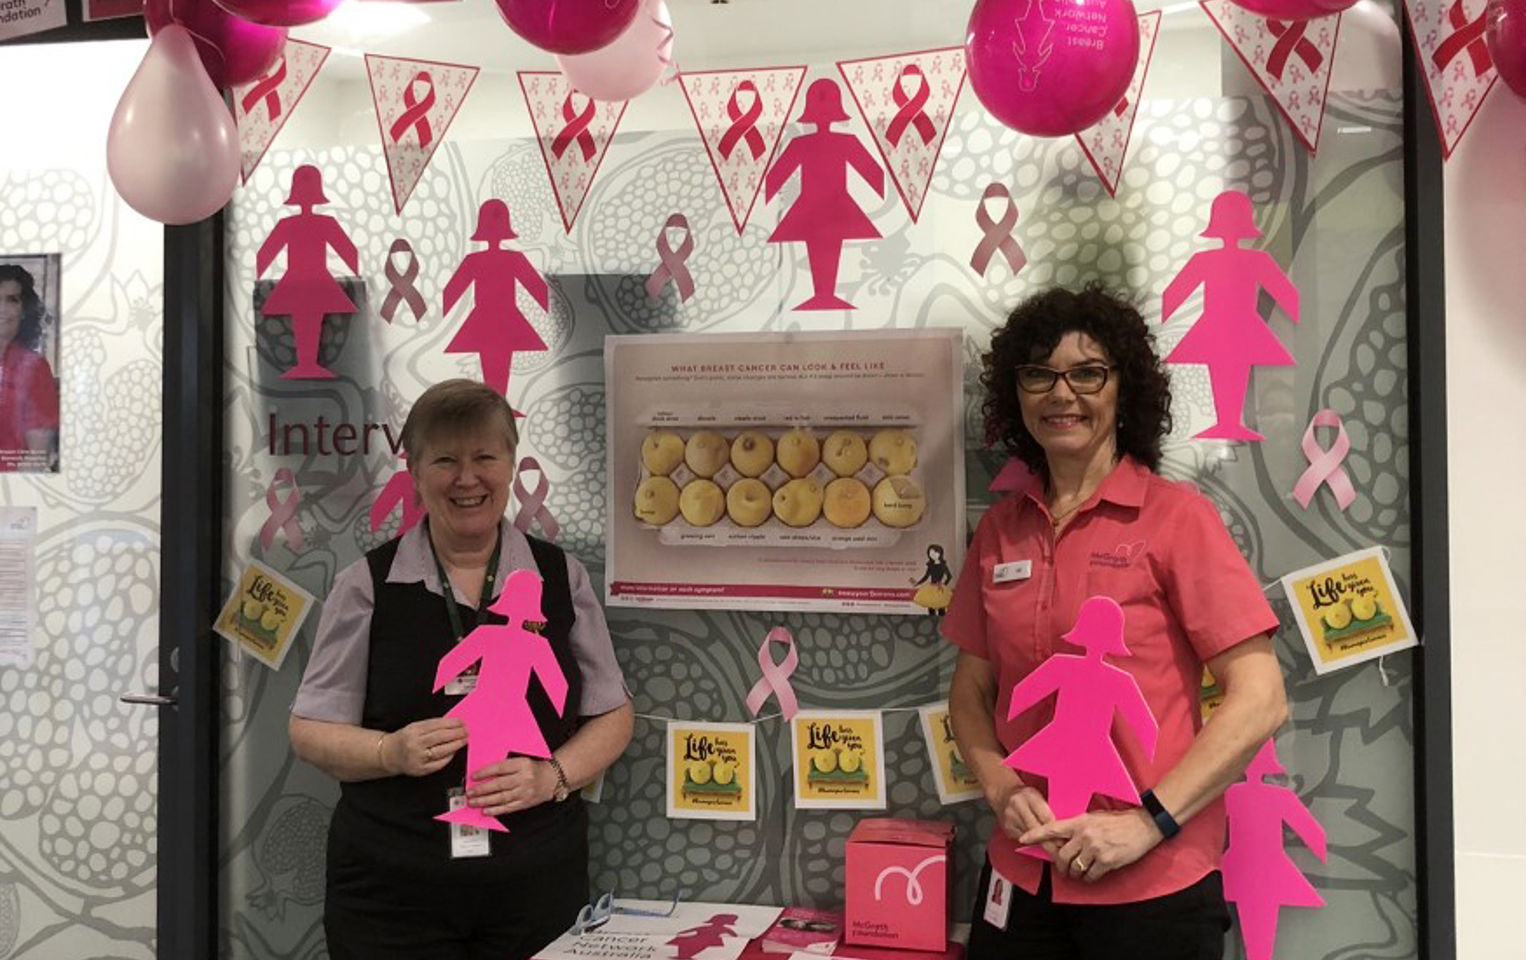 Maryanne and her colleague are standing amongst an array of pink lady silhouettes and pink ribbons for breast cancer awareness month, the day her life changed